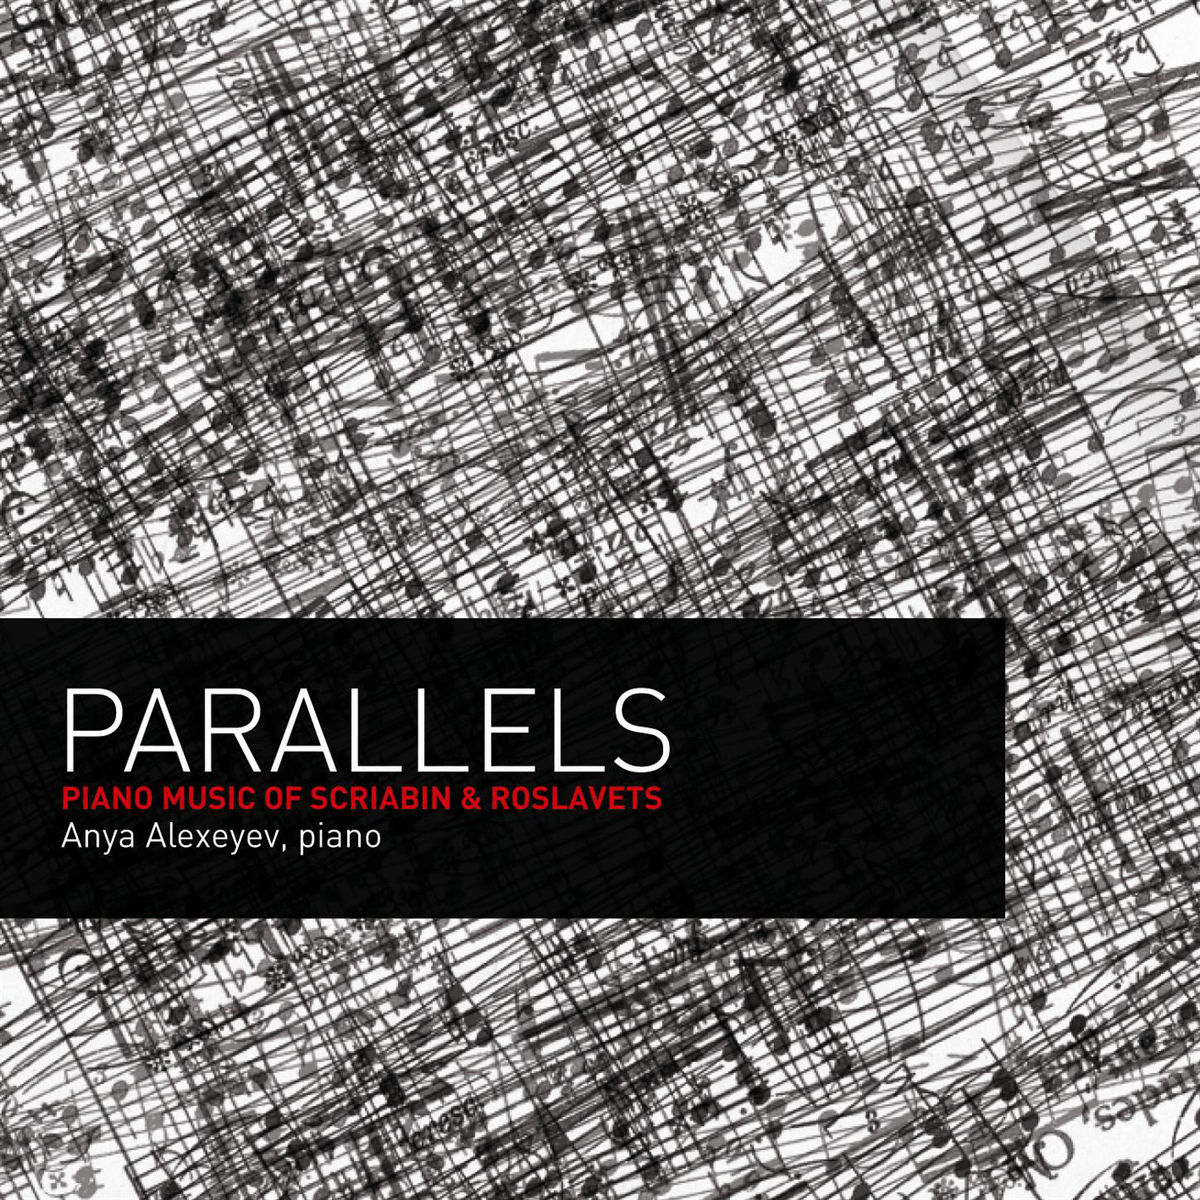 Anya Alexeyev - Parallels: Piano Music of Scriabin and Roslavets (2011) [FLAC 24bit/96kHz]